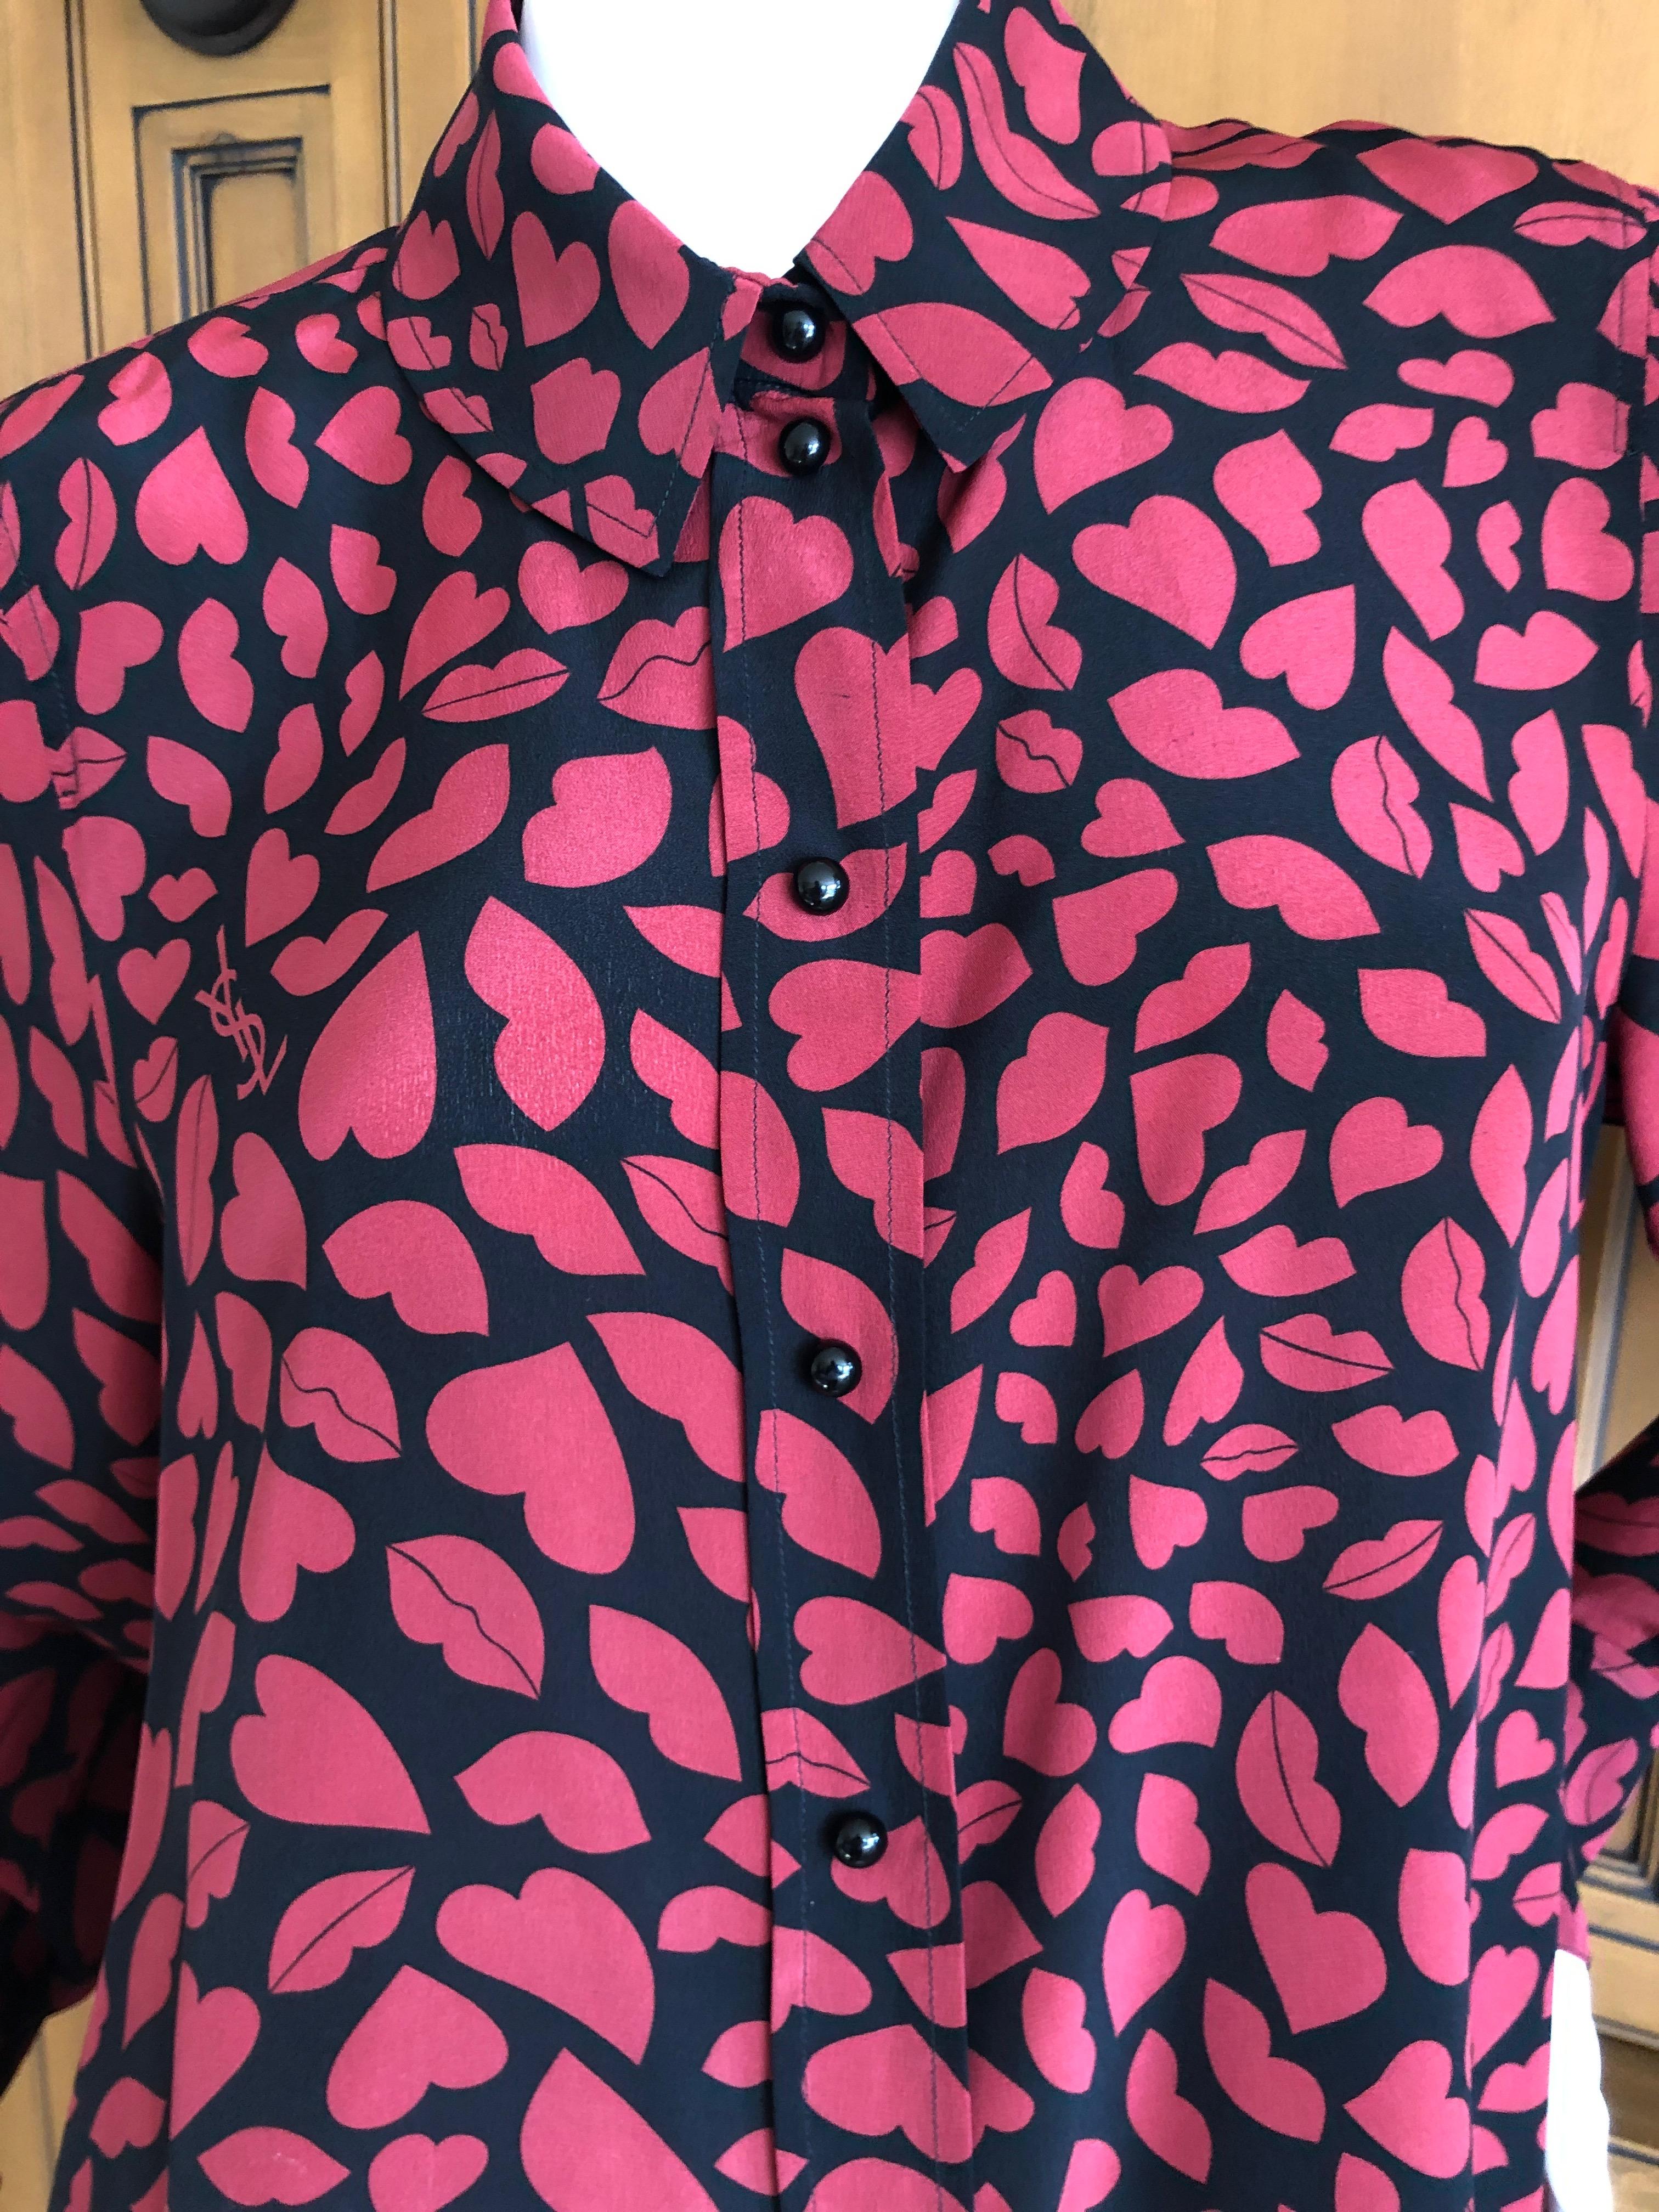 Yves Saint Laurent Vintage Heart and Lips Print Snap Front Blouse Size Large In Excellent Condition For Sale In Cloverdale, CA